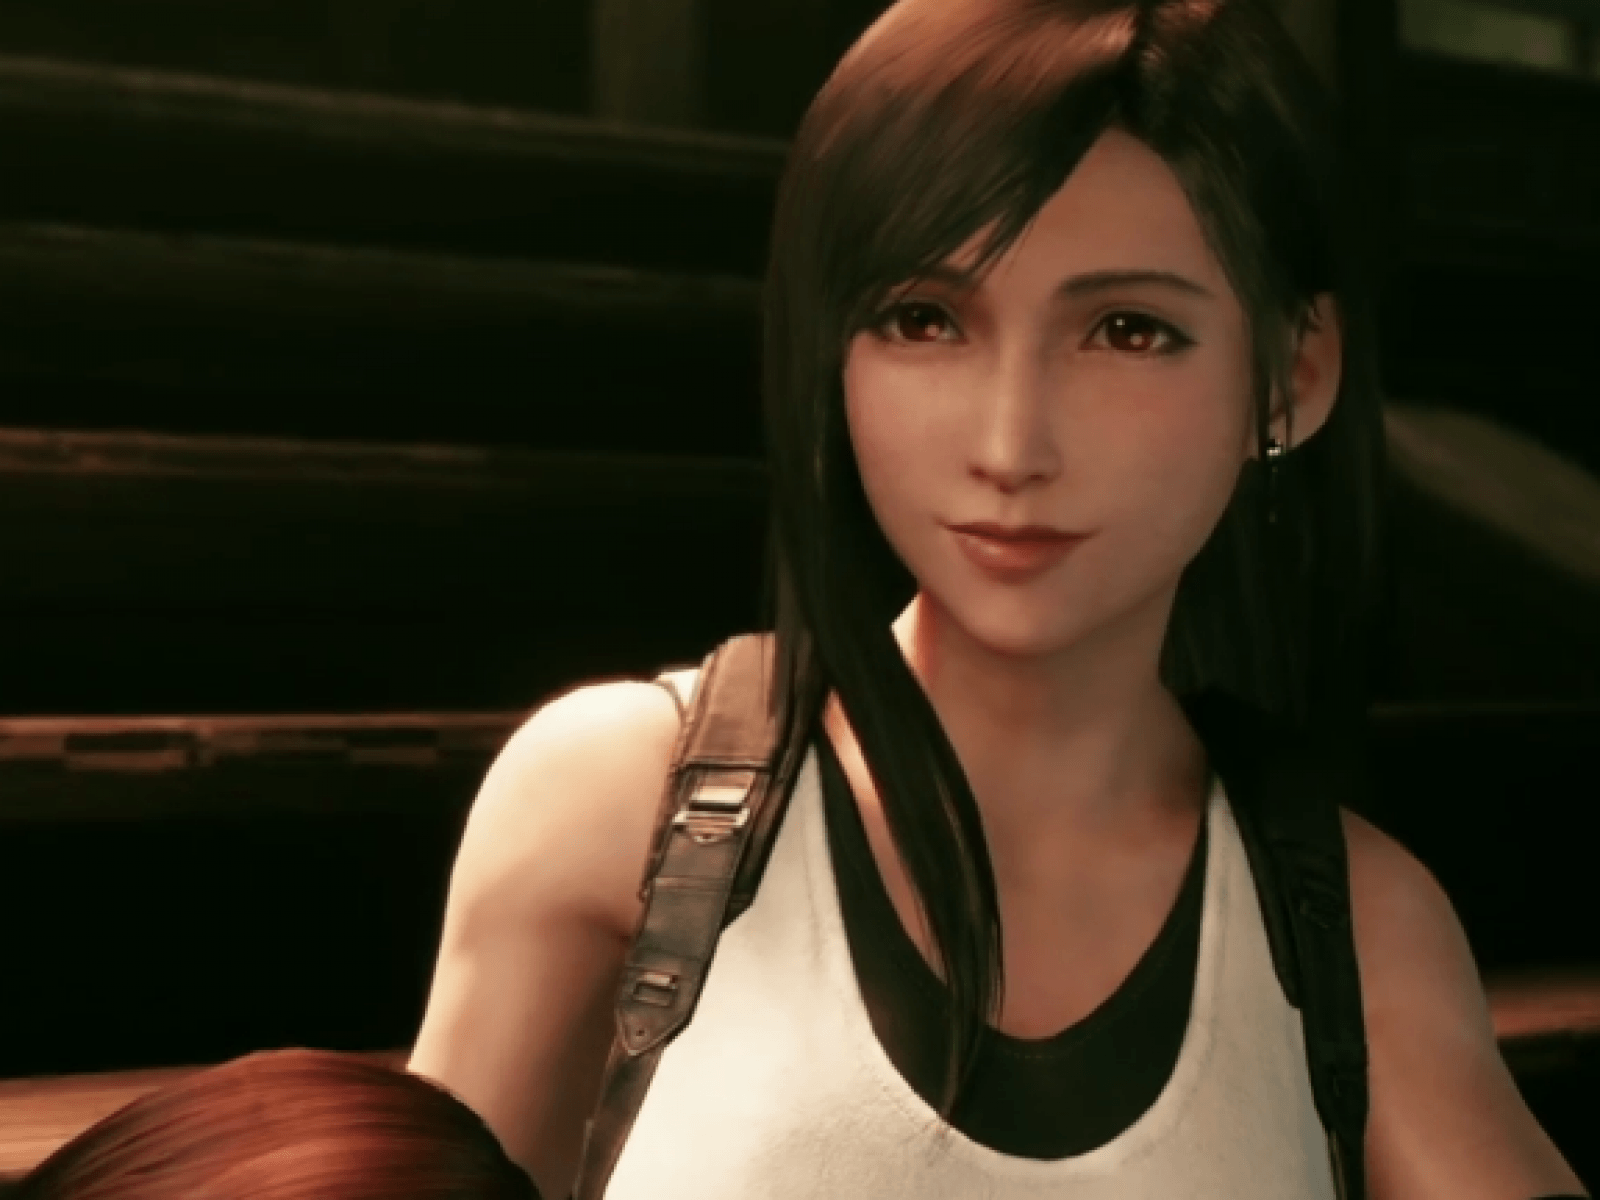 Final Fantasy VII' Remake E3 2019: First Look at Tifa, New Details